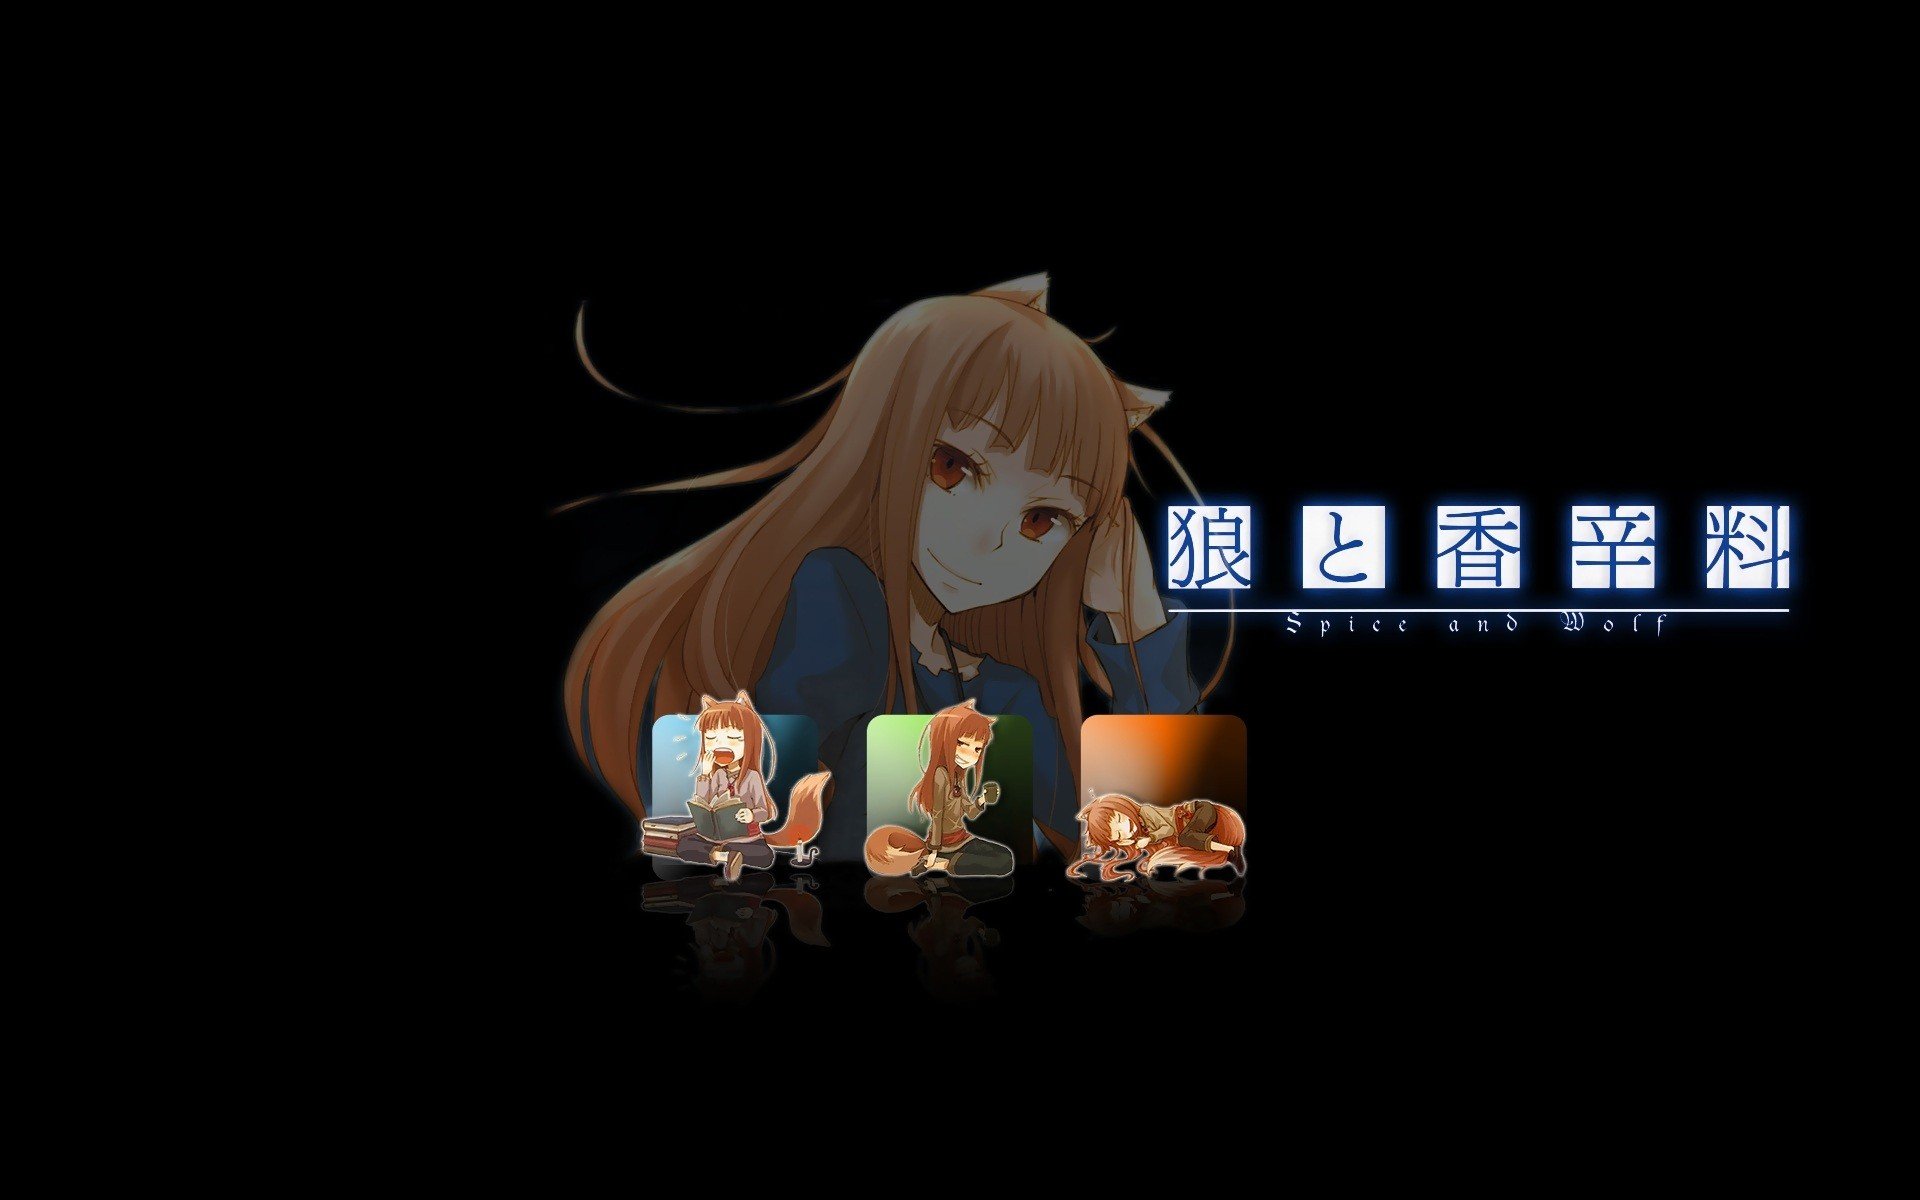 Spice and Wolf, Holo Wallpaper